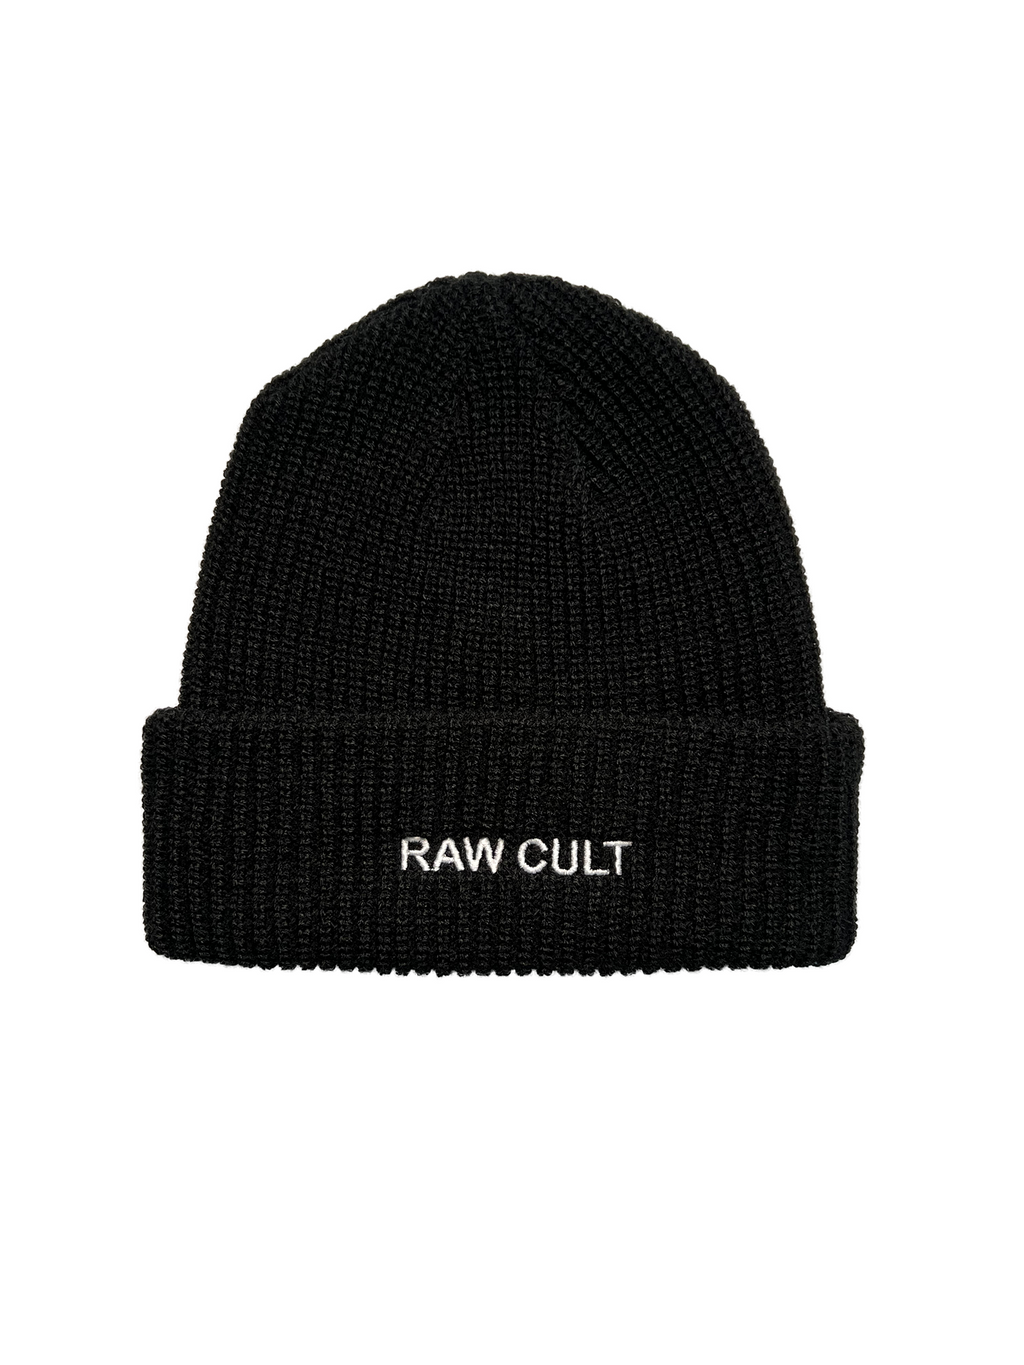 RAW CULT | Keep It Simple Tuque - Black